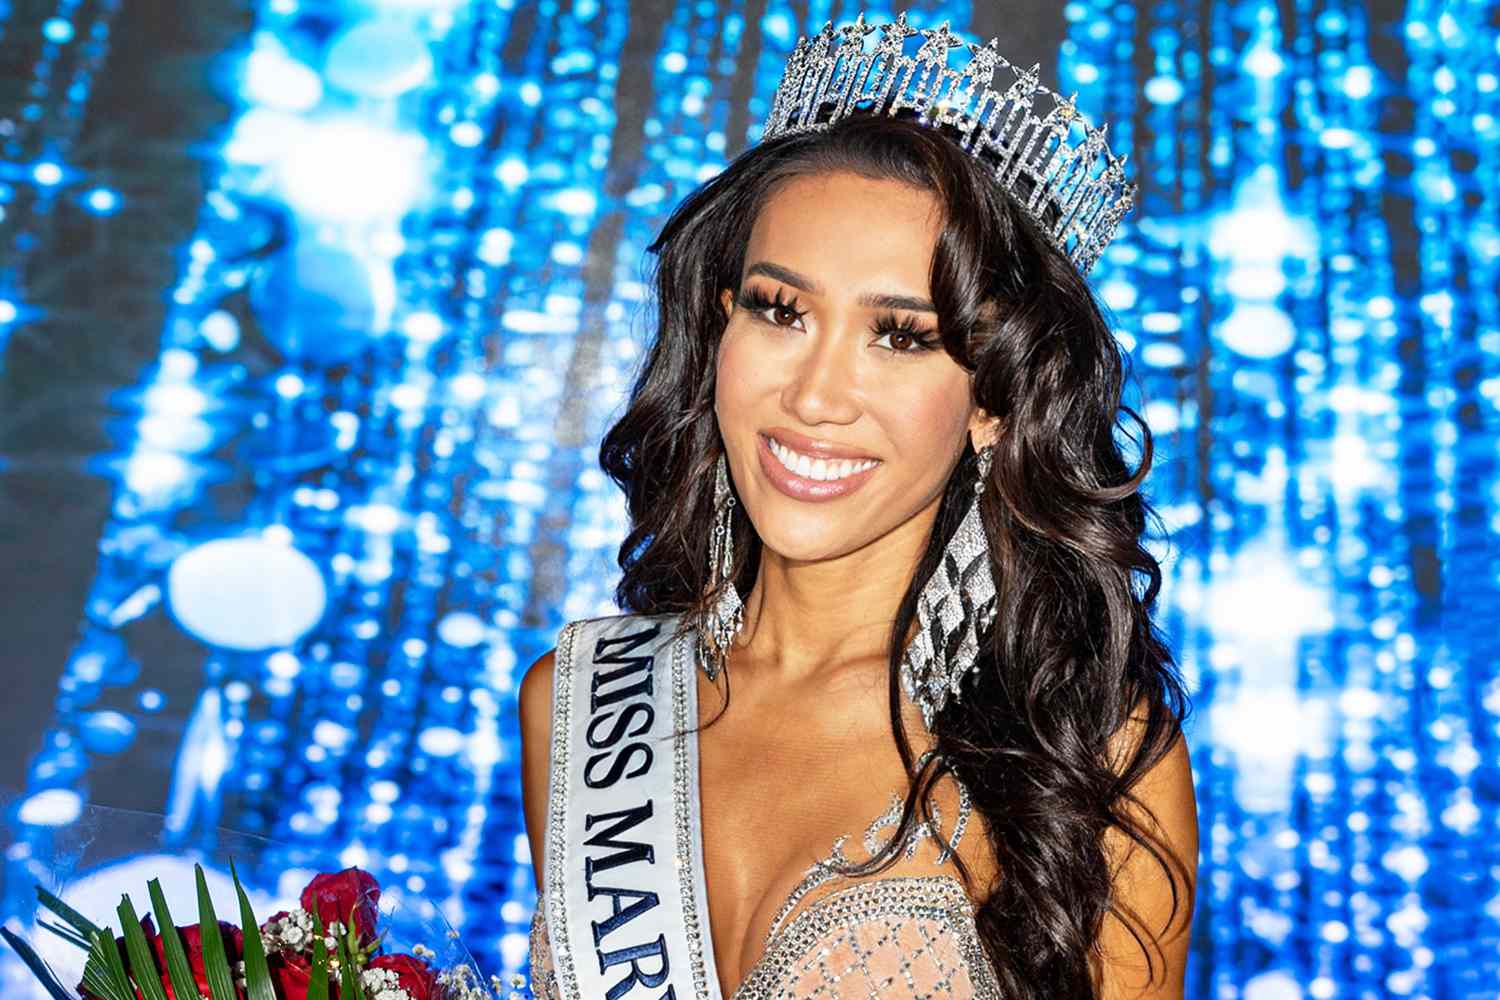 Who Is Bailey Anne Kennedy? She's Making History as First Transgender Woman to Win Miss Maryland USA